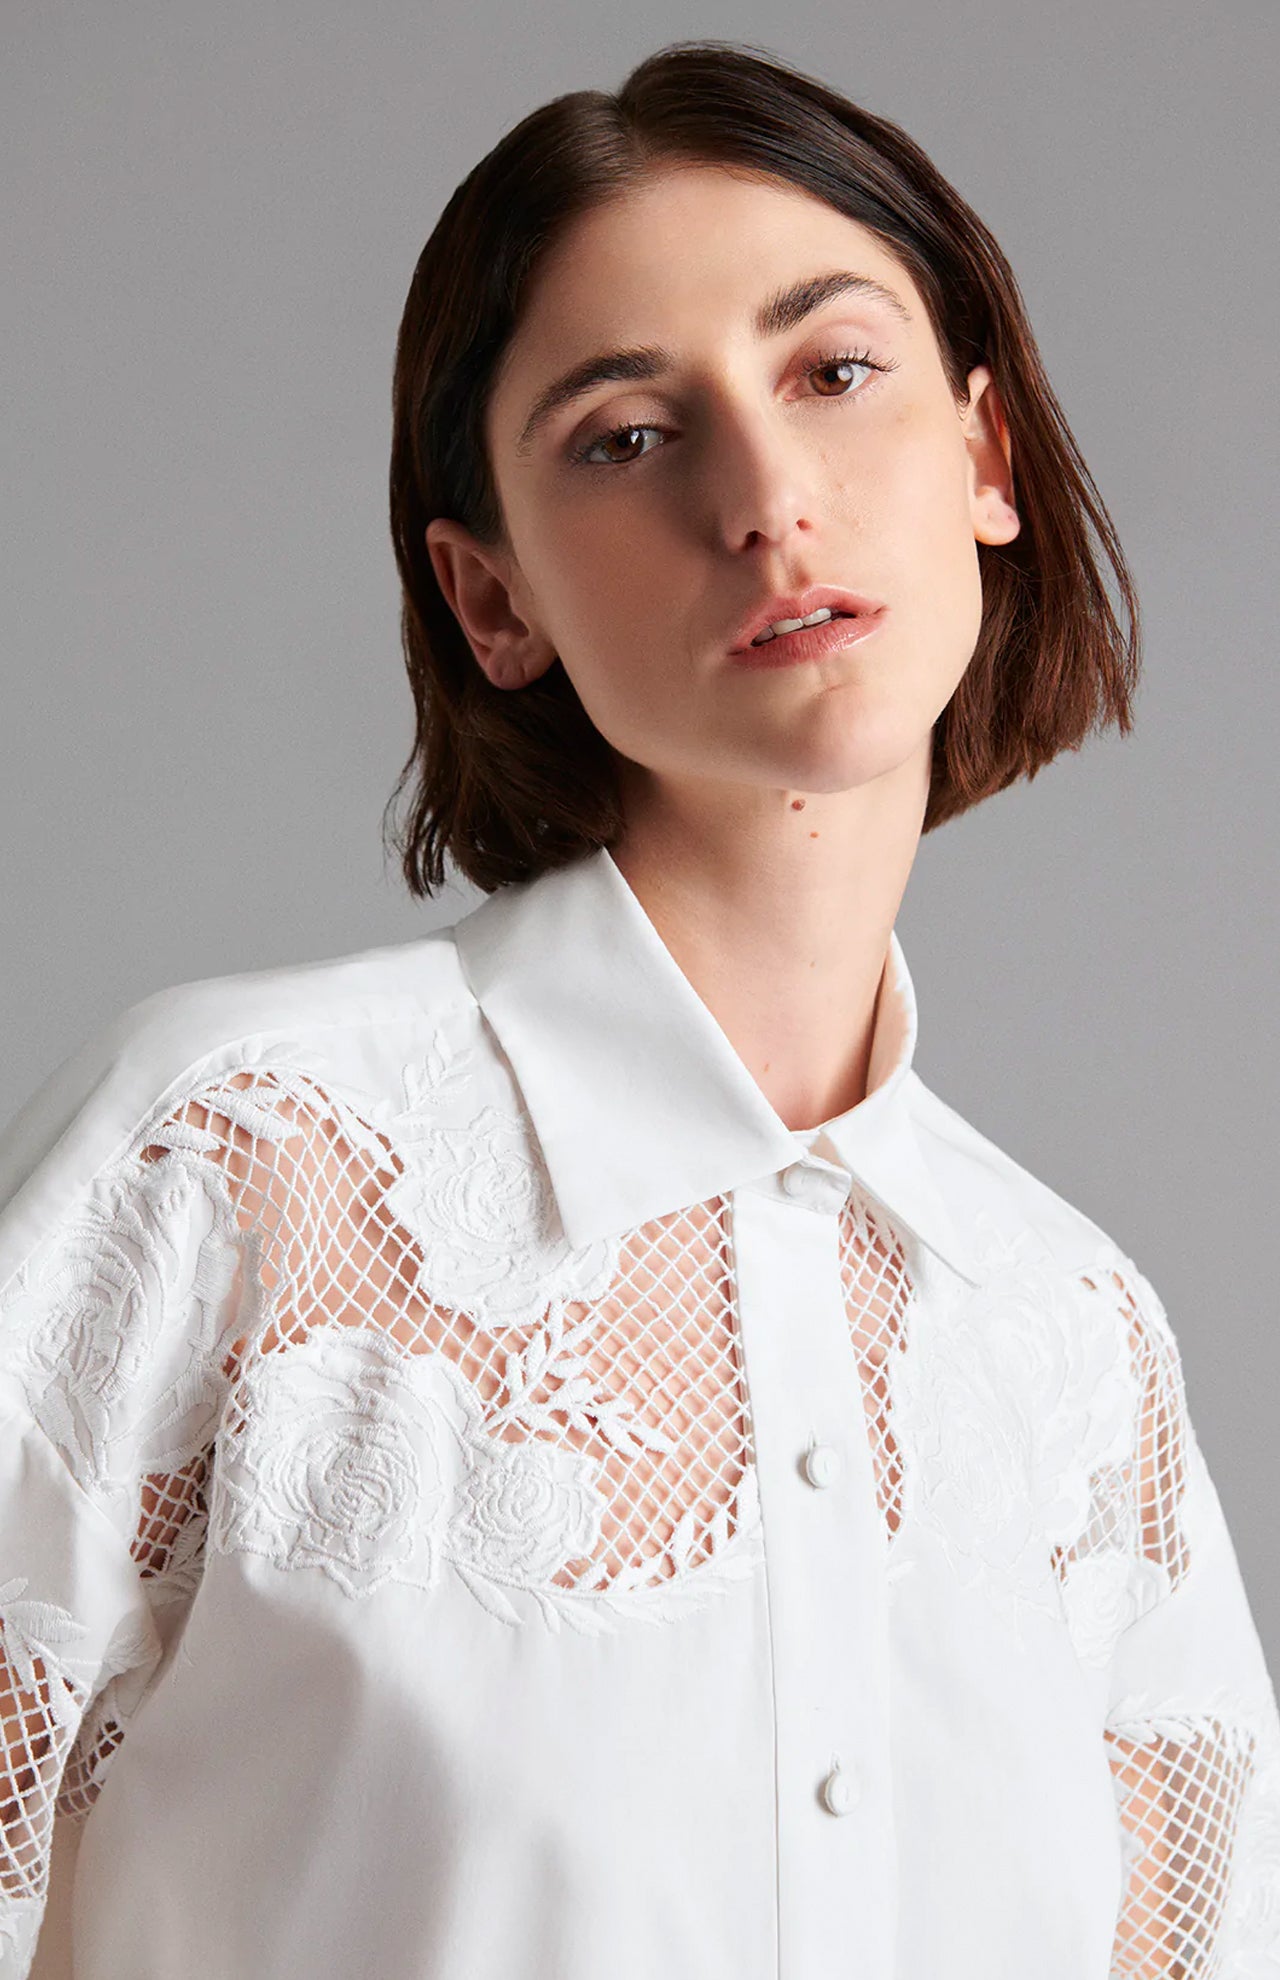 Rose Embroidered Long Sleeve Shirt (6859258822771)